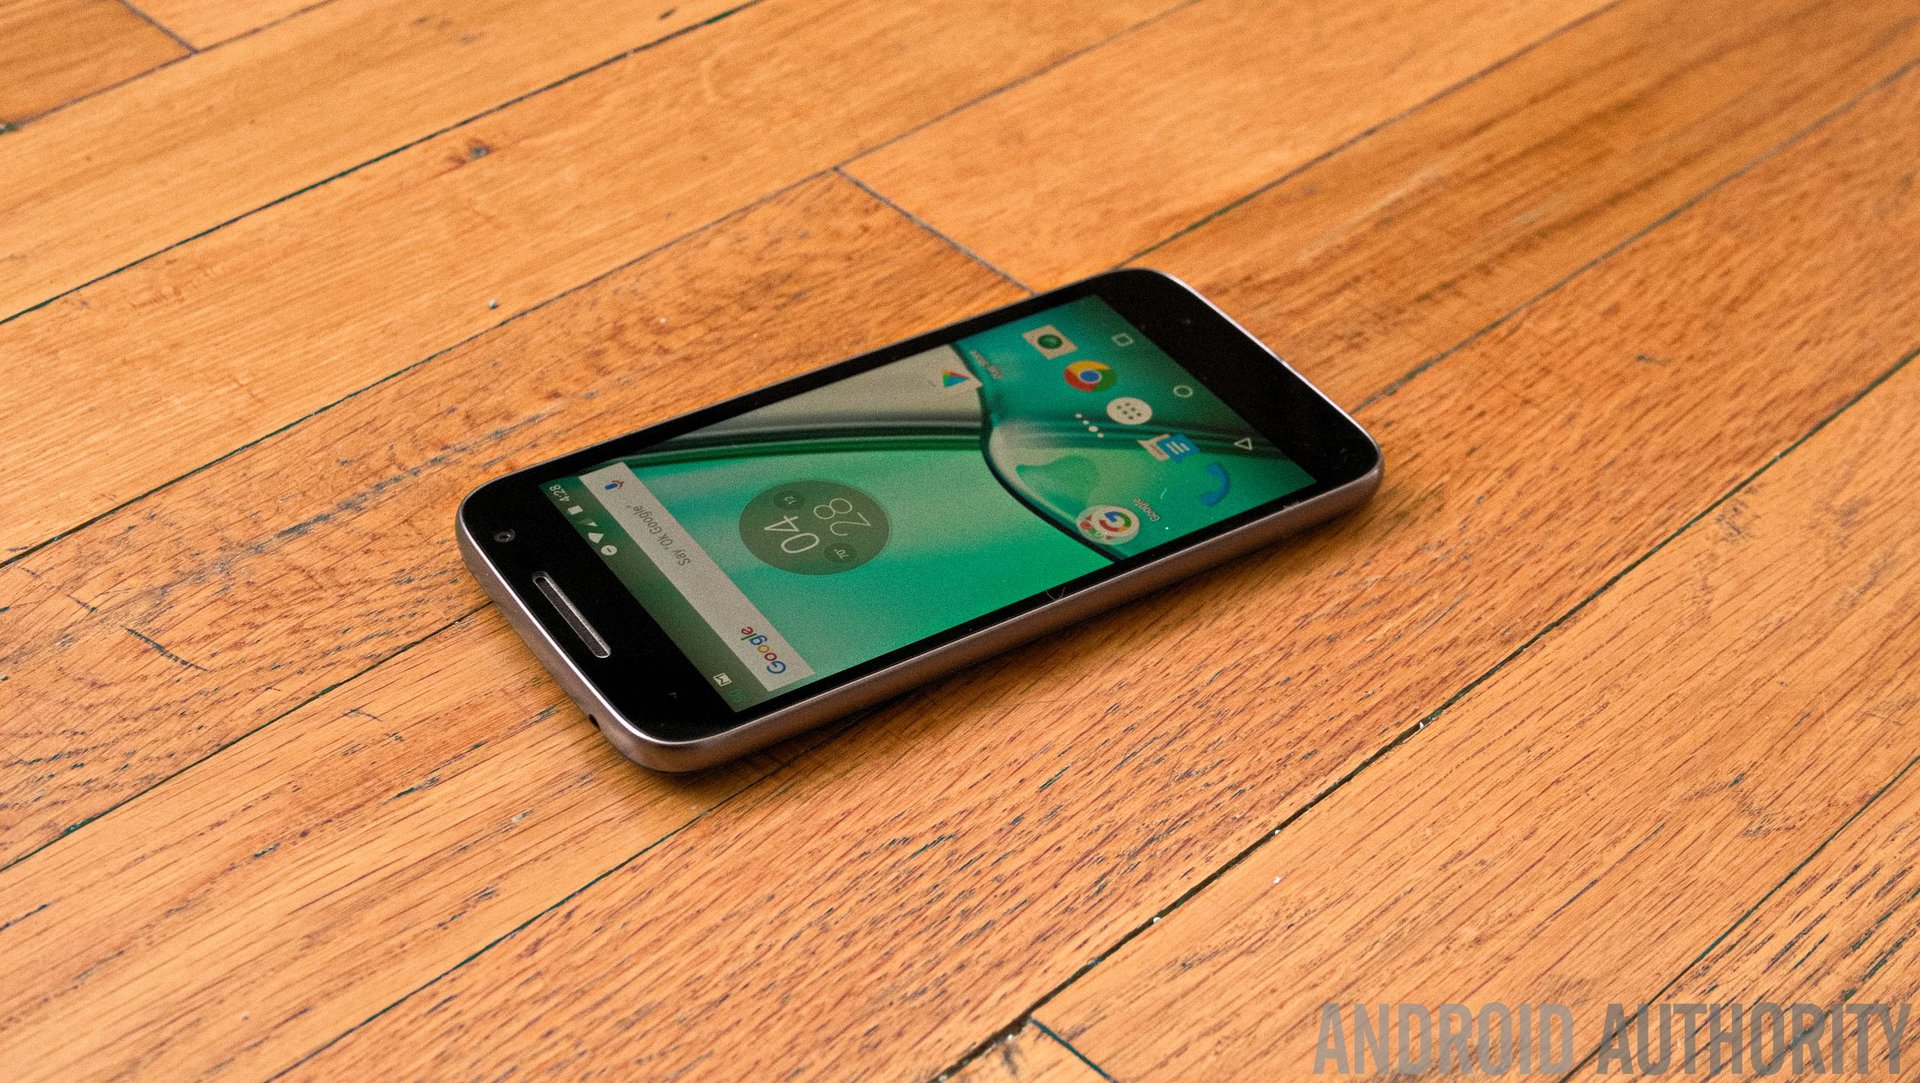 Lenovo Moto G4 Play review: a simple smartphone with good battery life